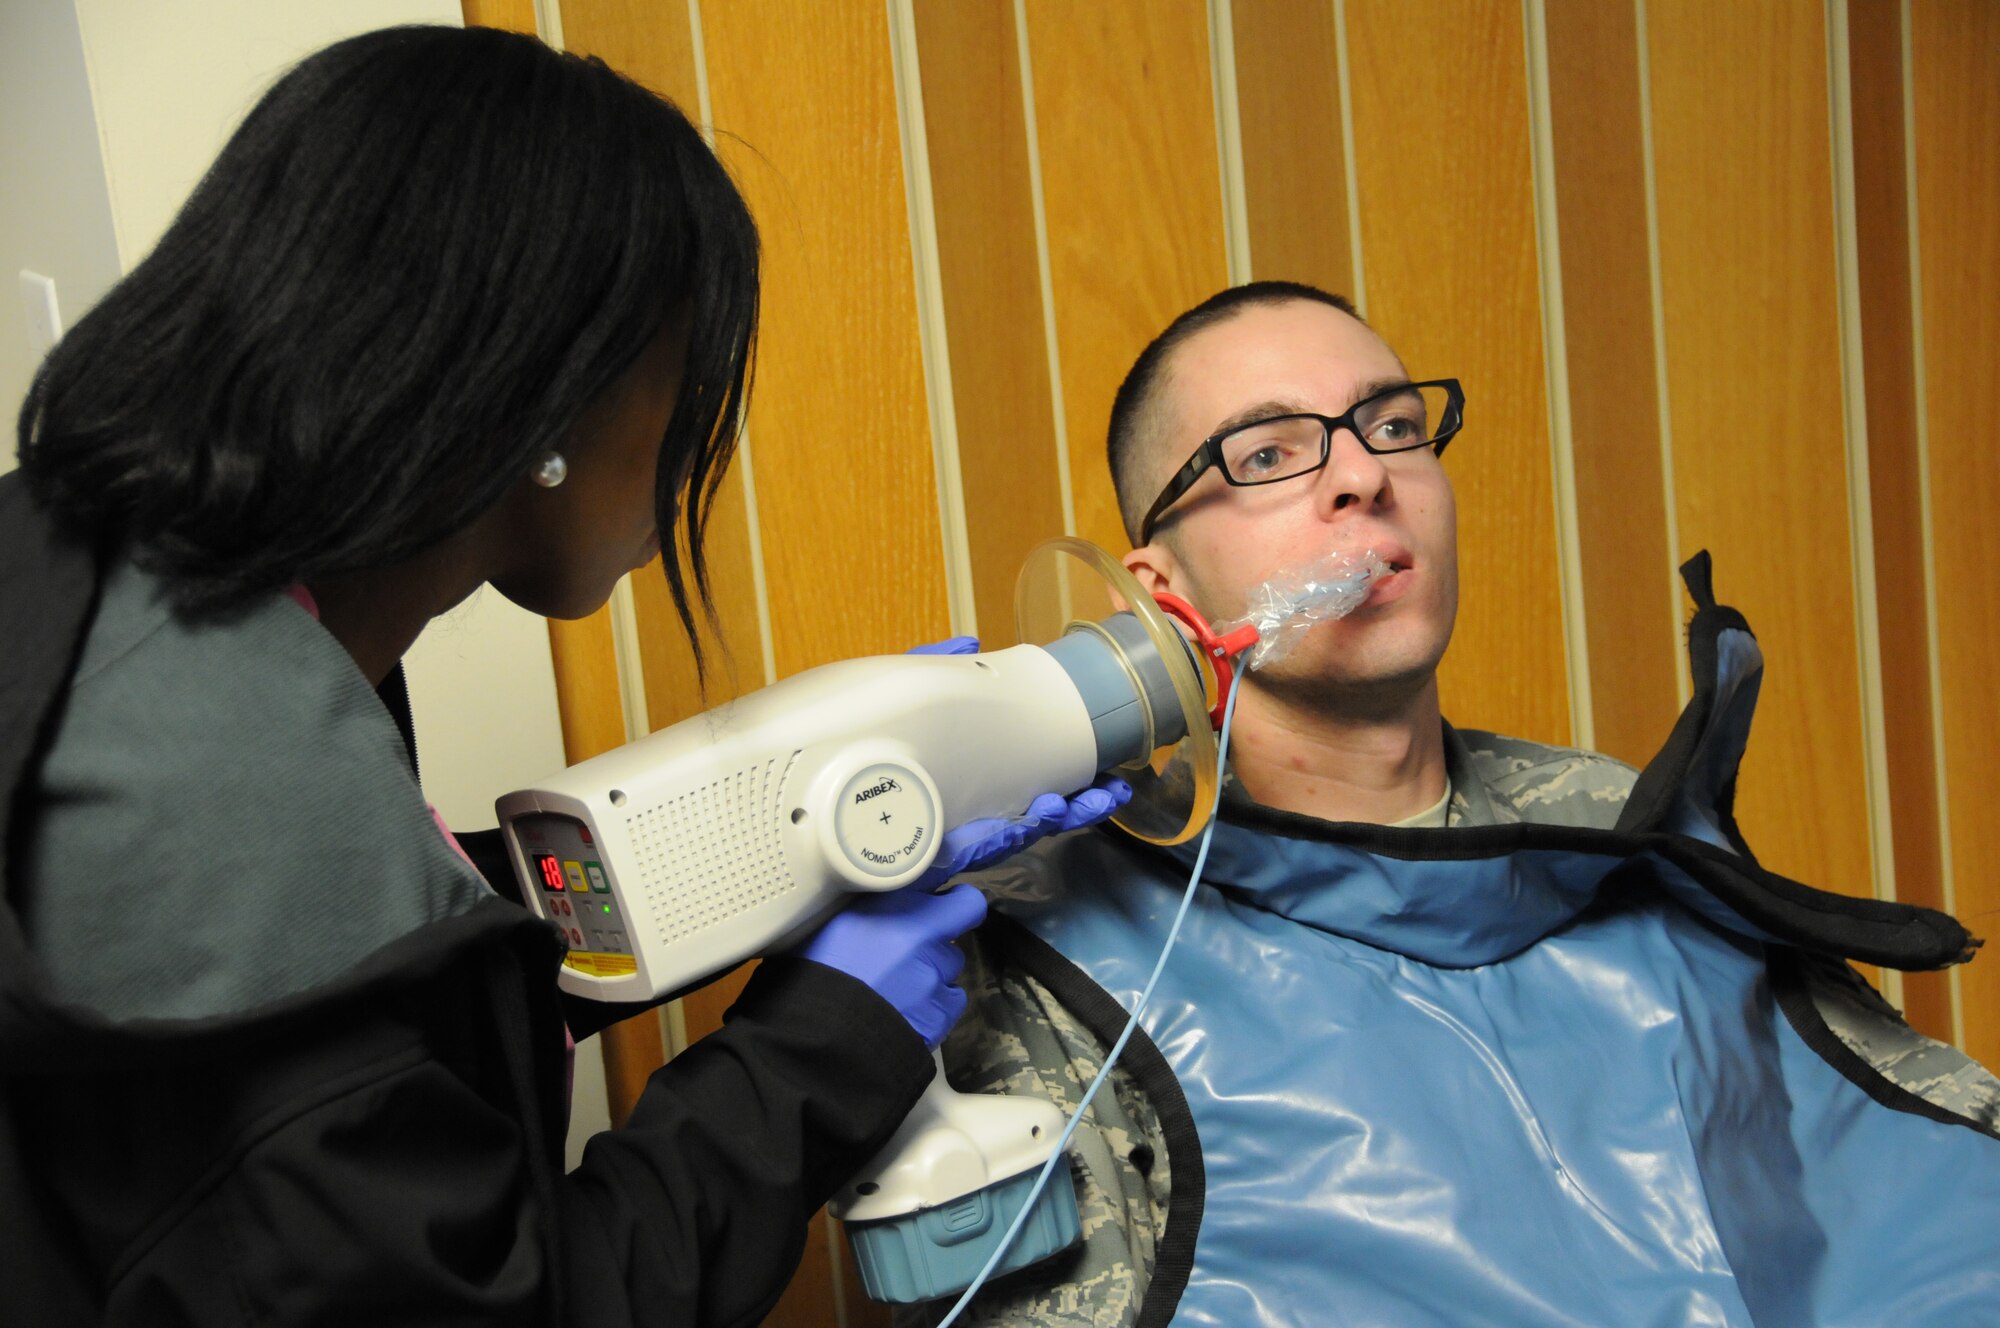 Marie Edouard, Logistics Health dental assistant, uses a portable X-ray machine to take a dental X-ray of Senior Airman Chris Winship, 267th Combat Communications Squadron cyber transport technician, at the 102nd Medical Group building on Otis Air National Guard Base, Mass. Oct. 13. Winship was one of approximately 120 servicemembers who received complimentary dental treatment from Logistics Health dental professionals thorughout the weekend. (Air National Guard photo by Senior Airman Patrick McKenna/Released)